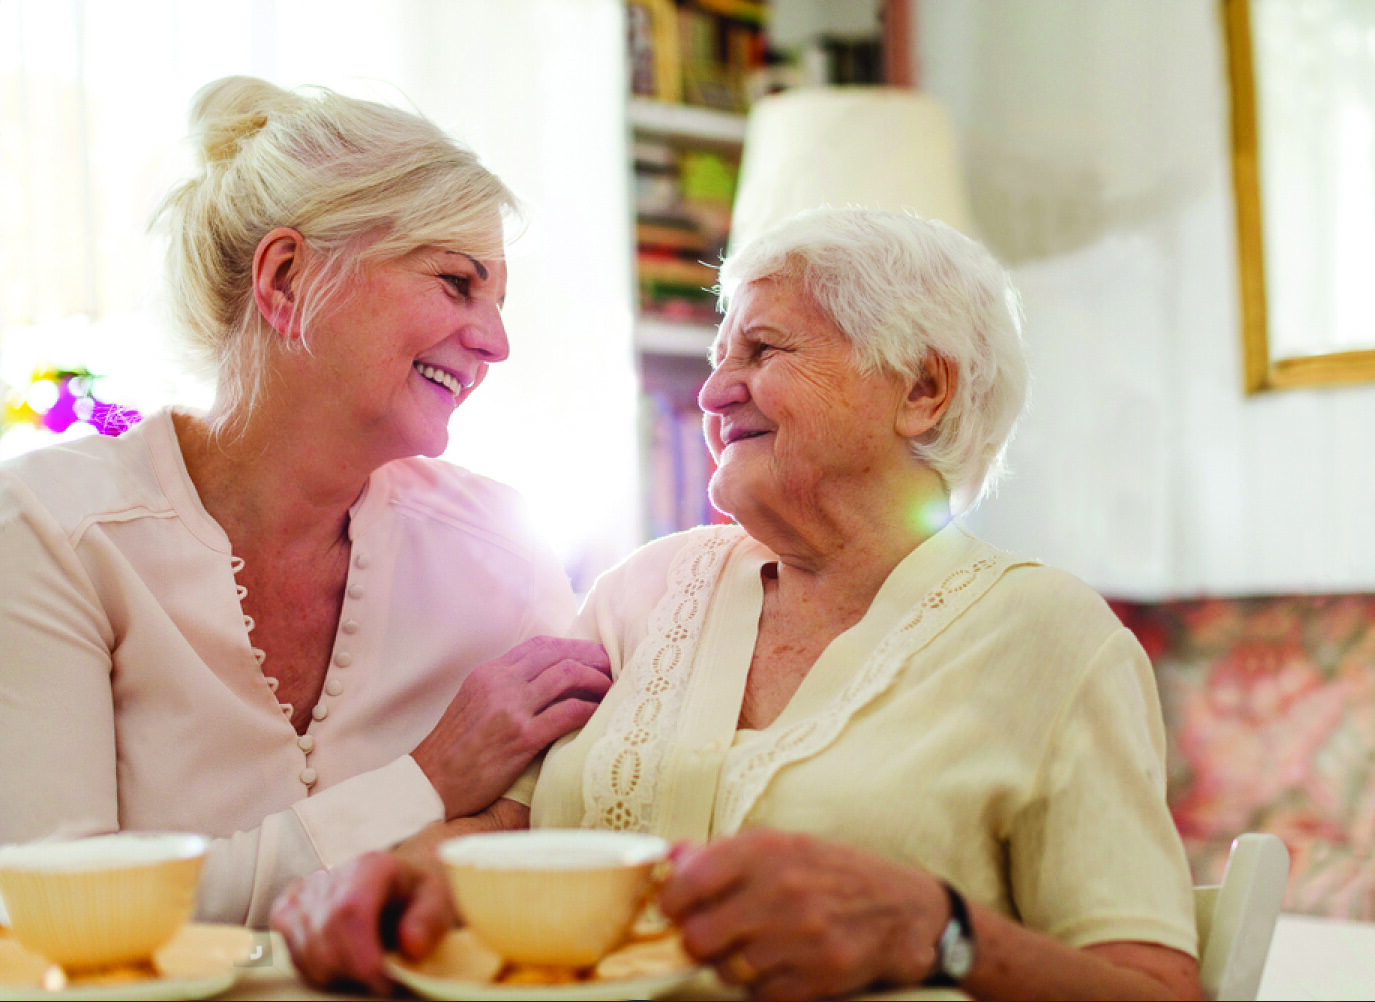 Woman caring for a senior family member - caregivers need support